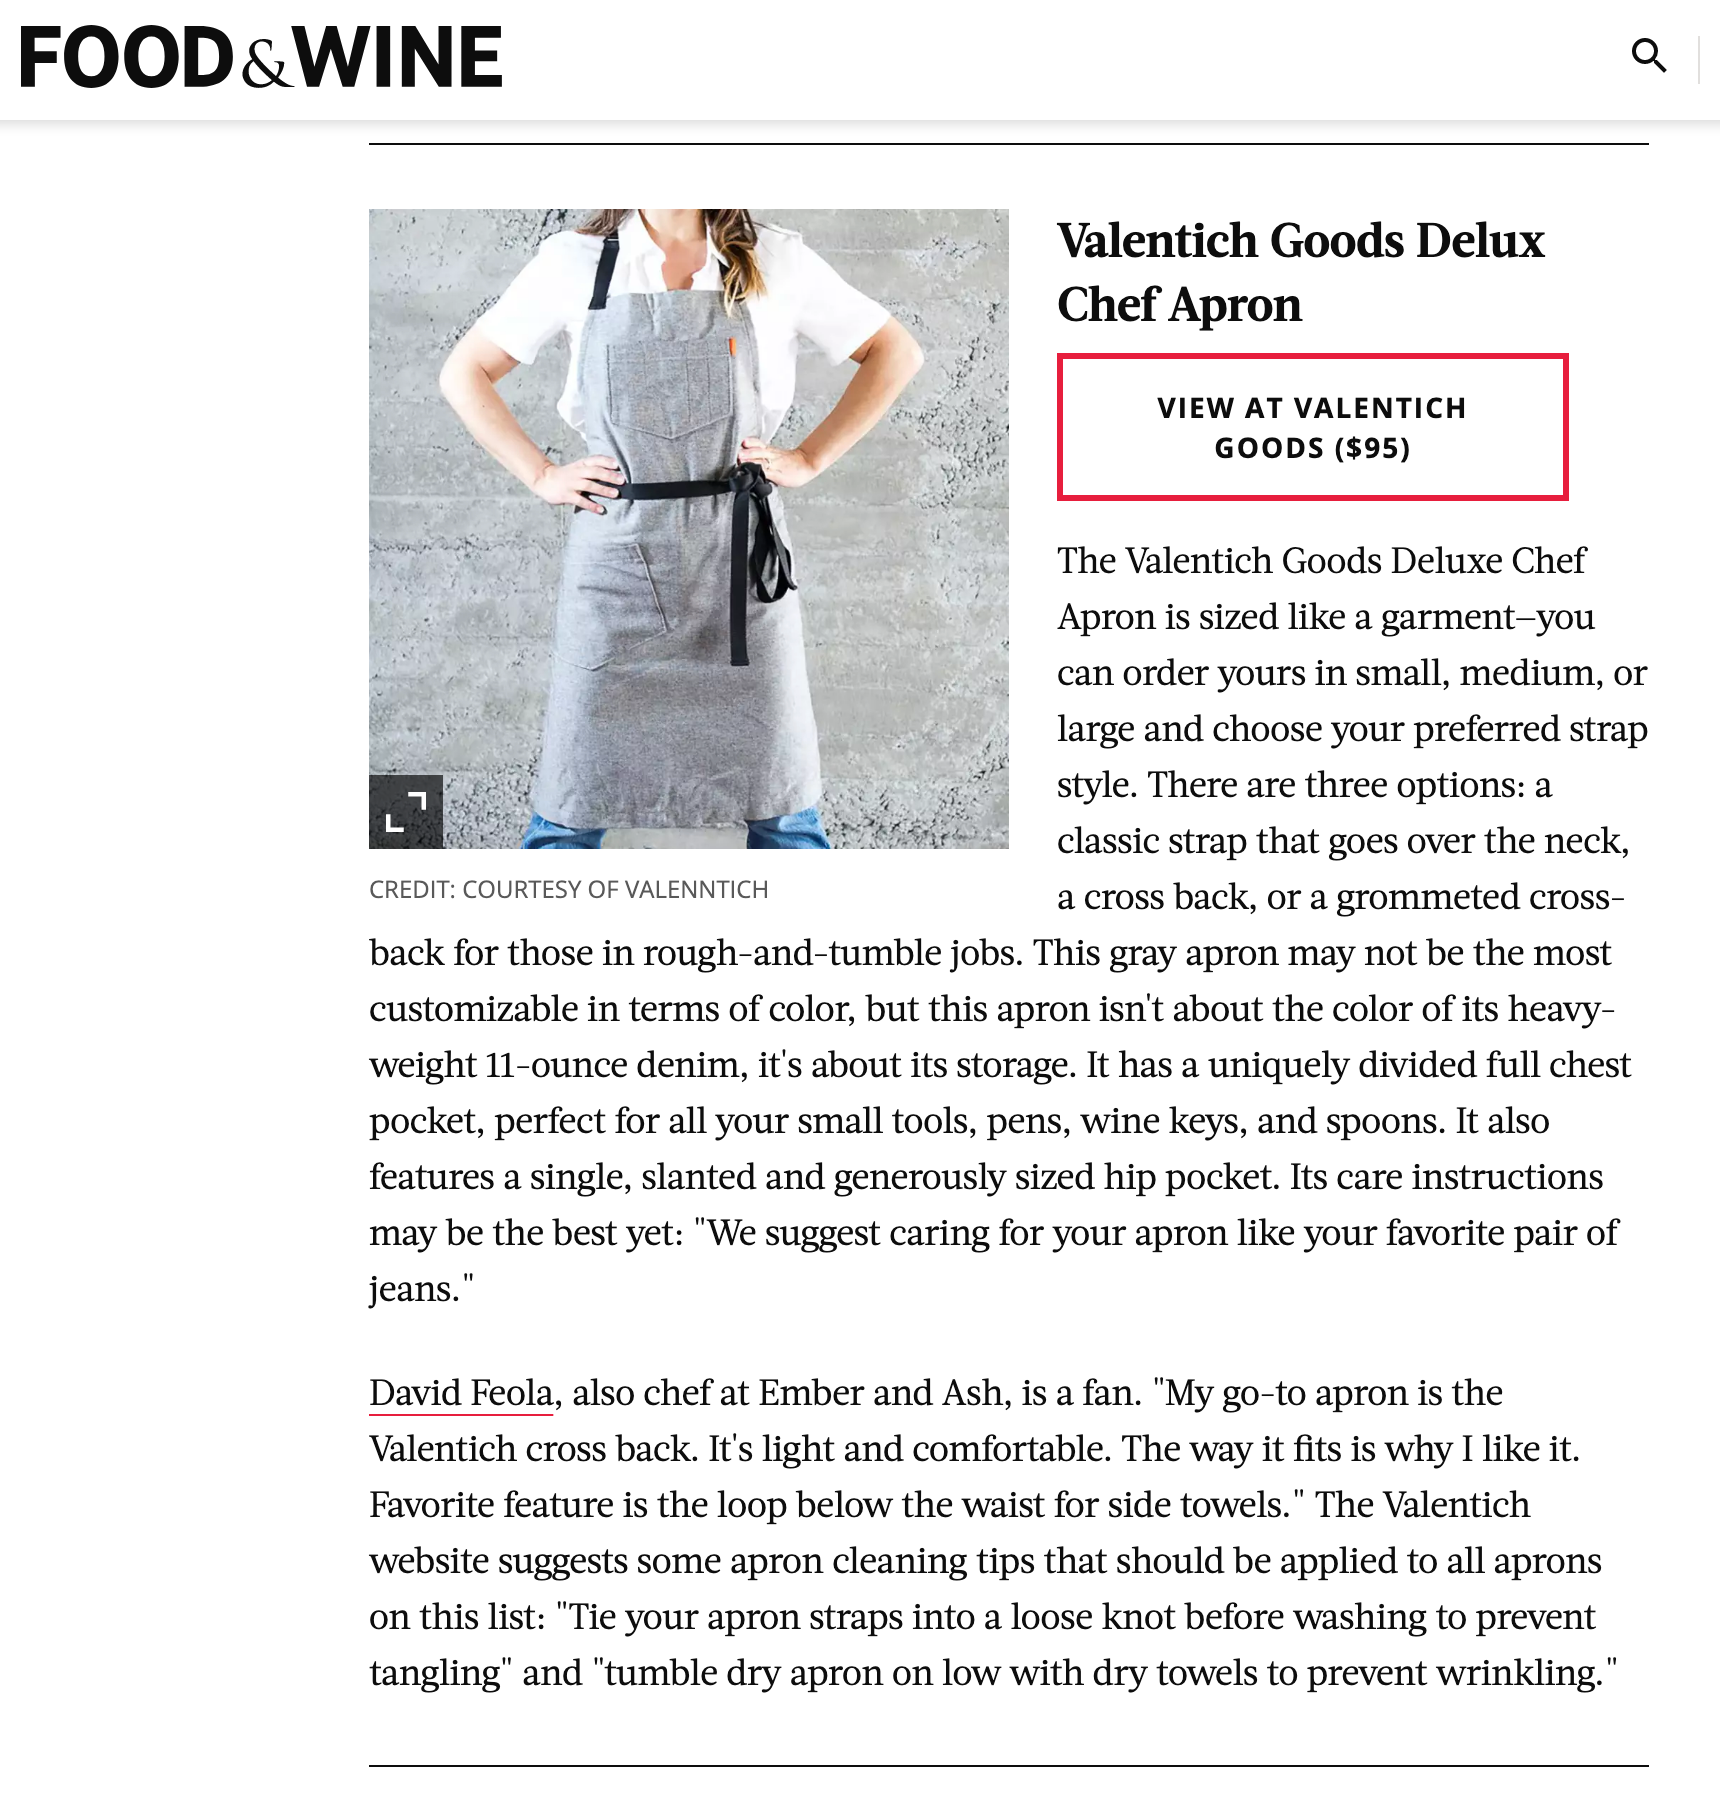 Best Chef Aprons in Food & Wine - Valentich Goods